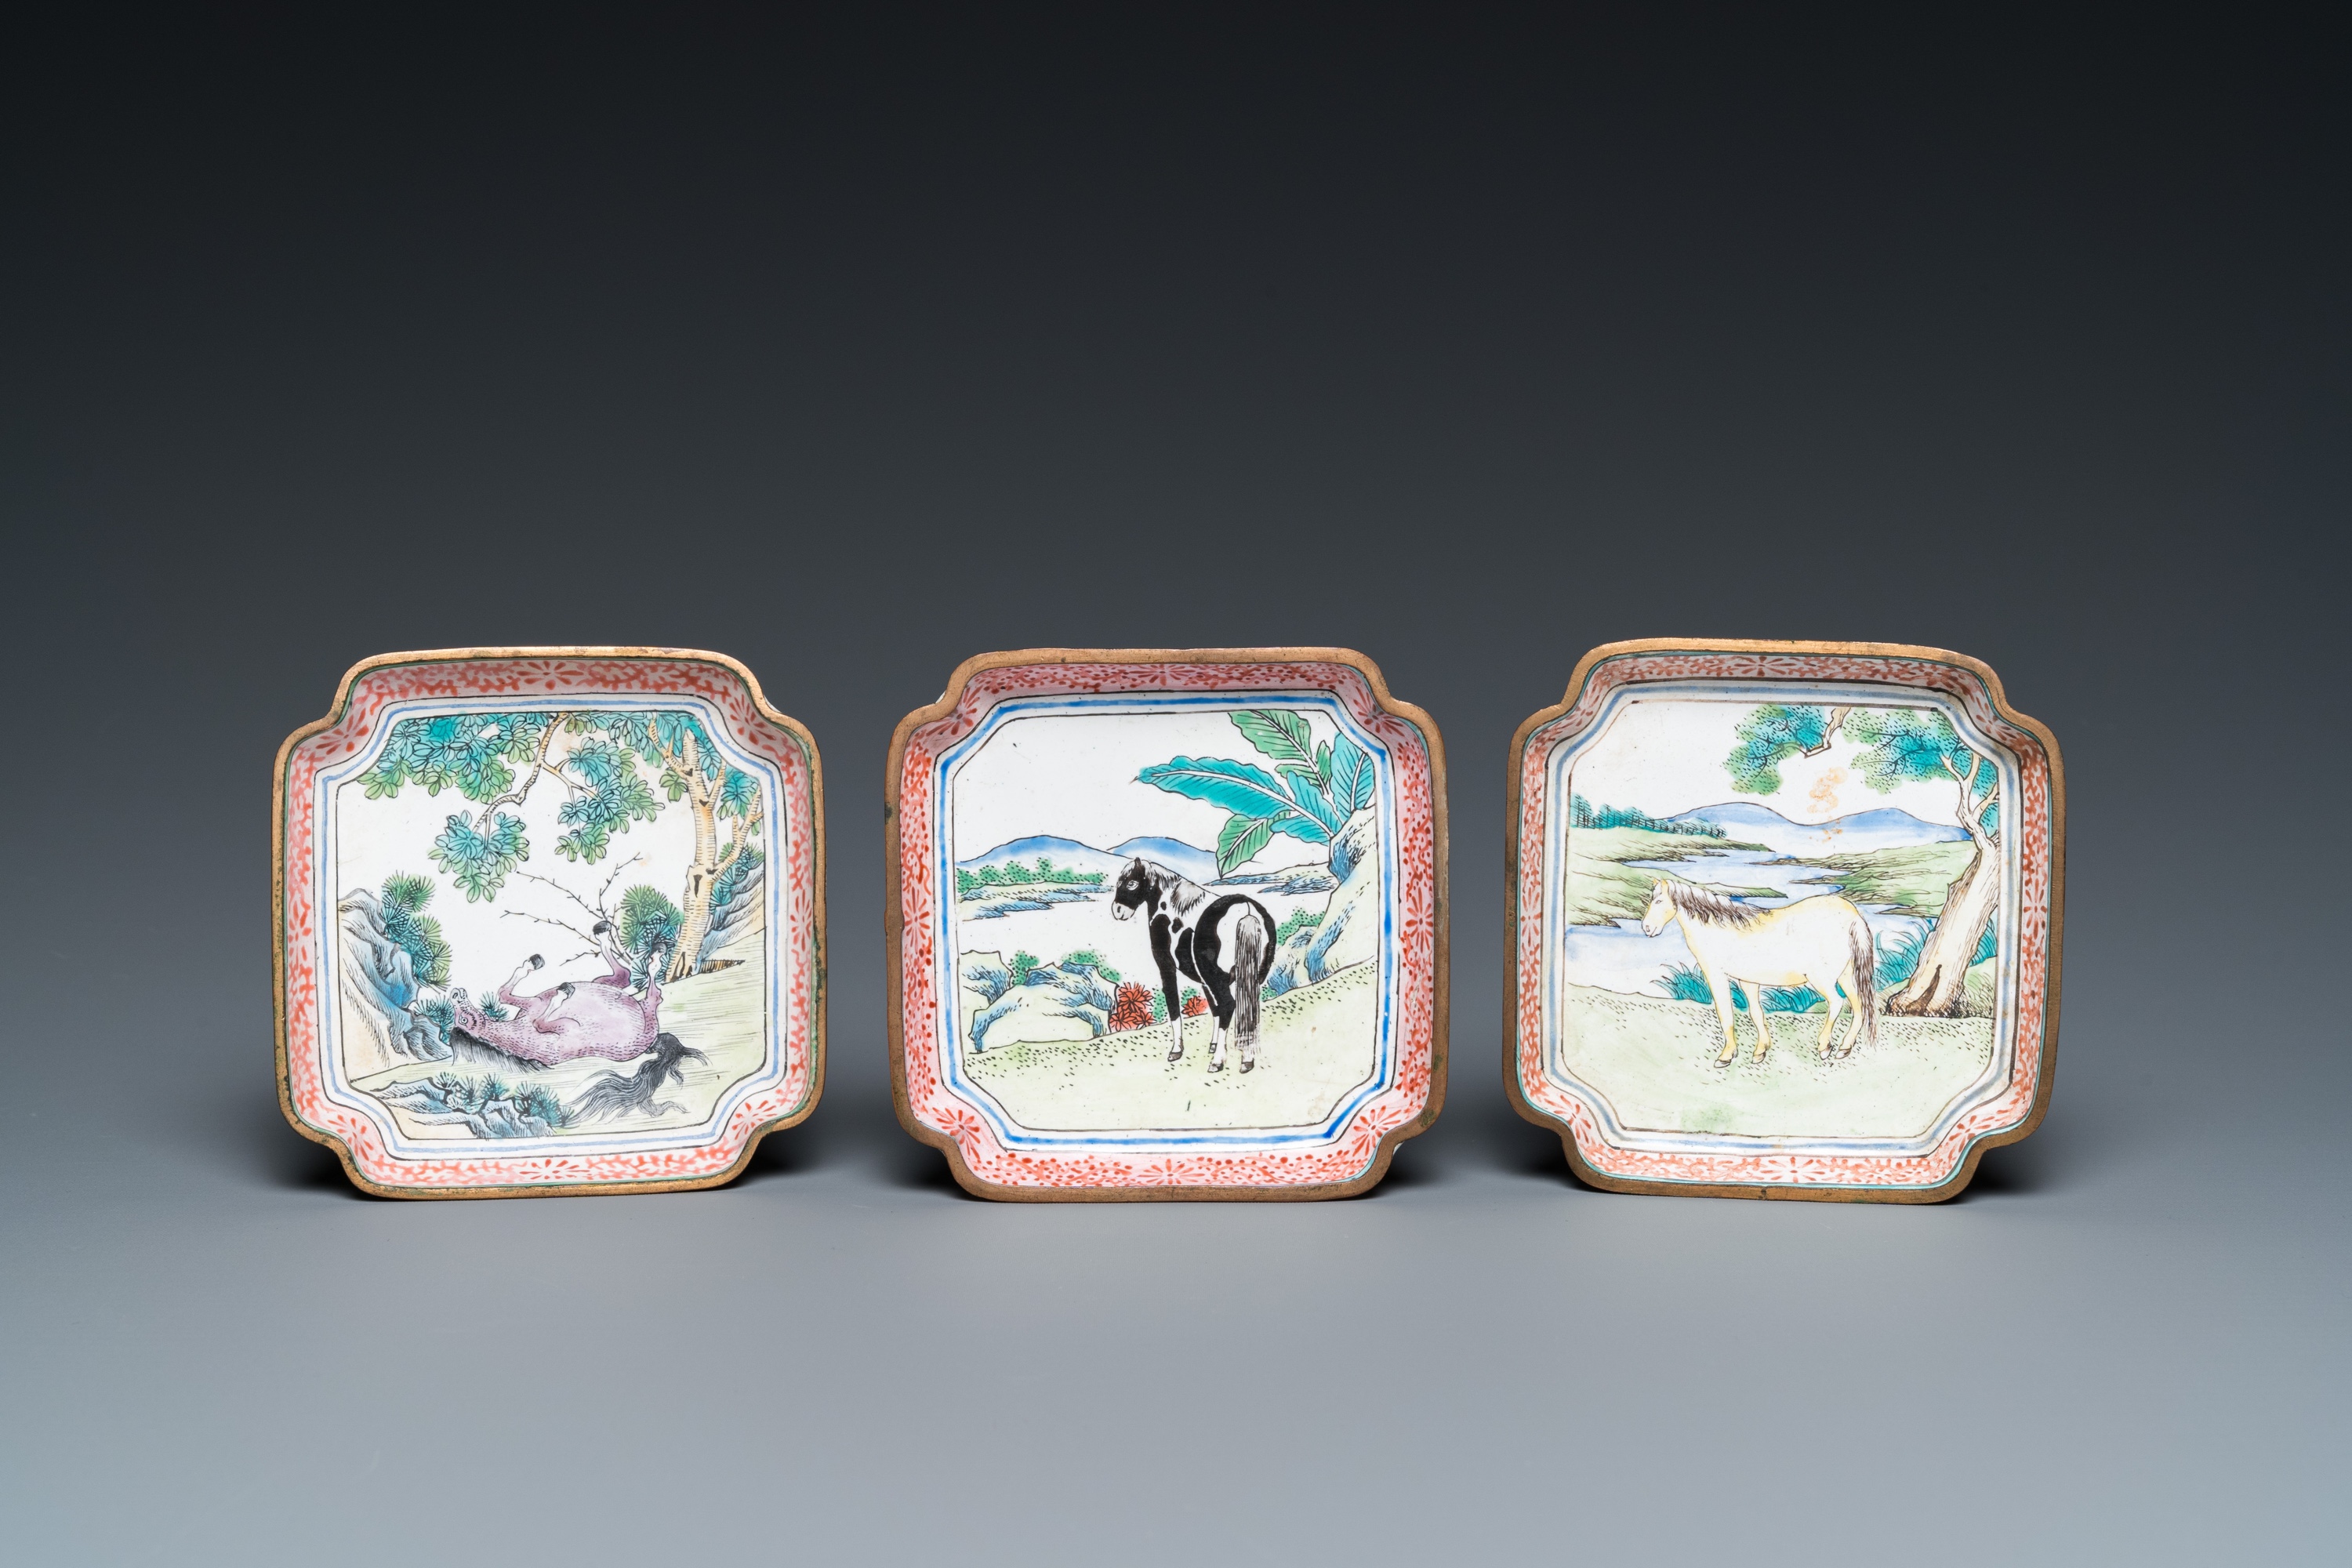 A Chinese Canton enamel tea caddy and four small dishes, 19th C. - Image 11 of 12